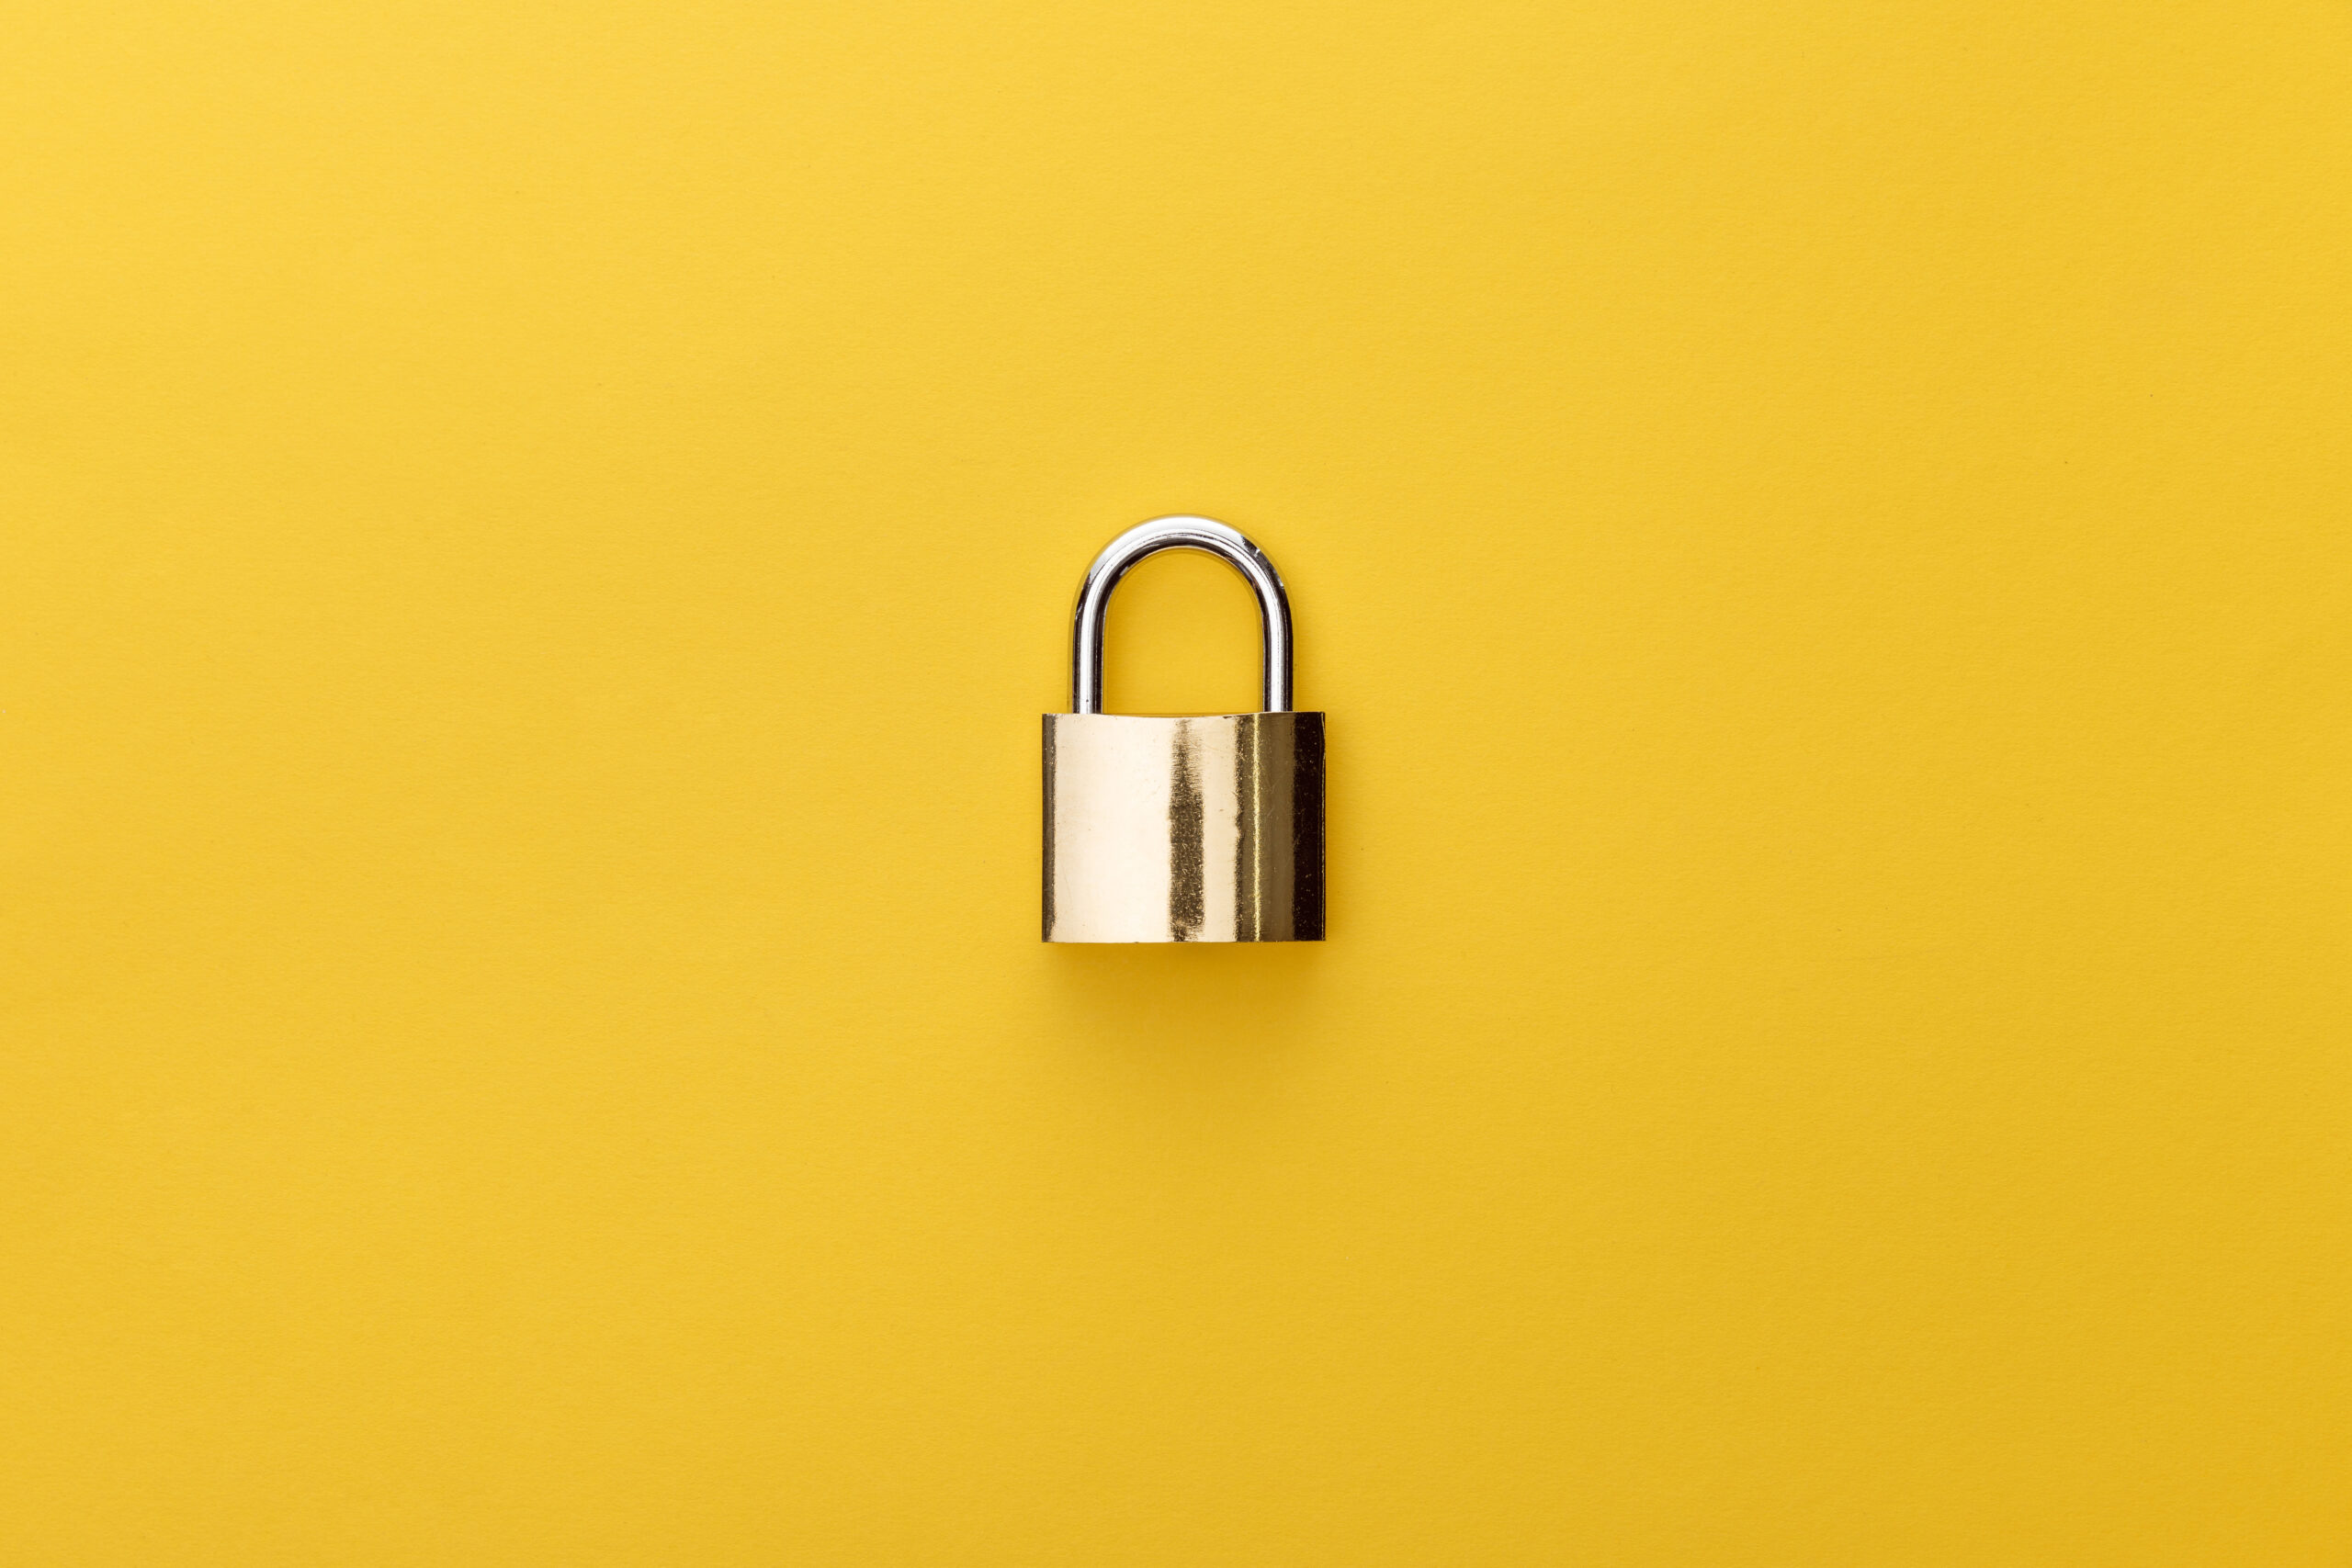 A metal pad lock in front of a yellow background.